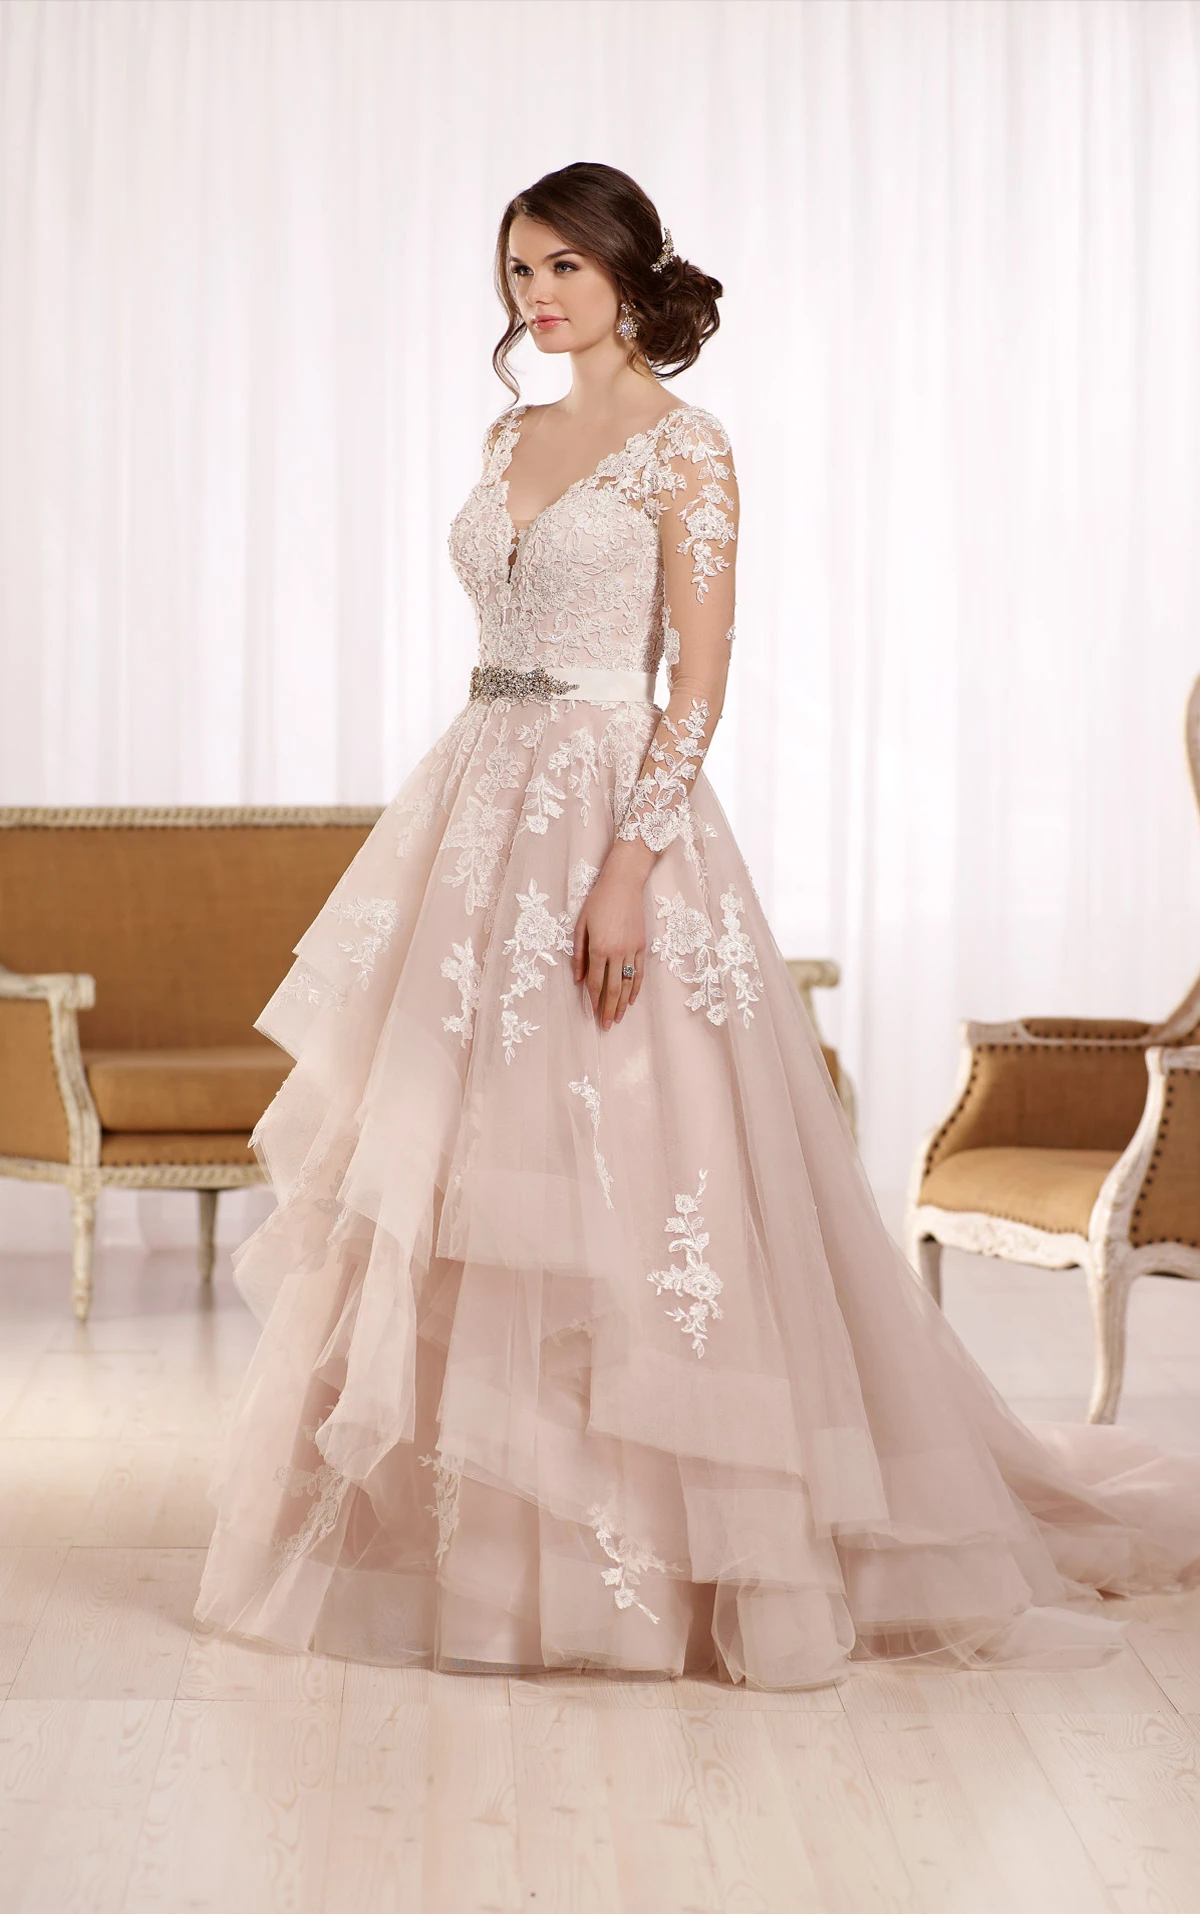 Wedding Dress With Long Illusion Lace Sleeves | Essense of ...